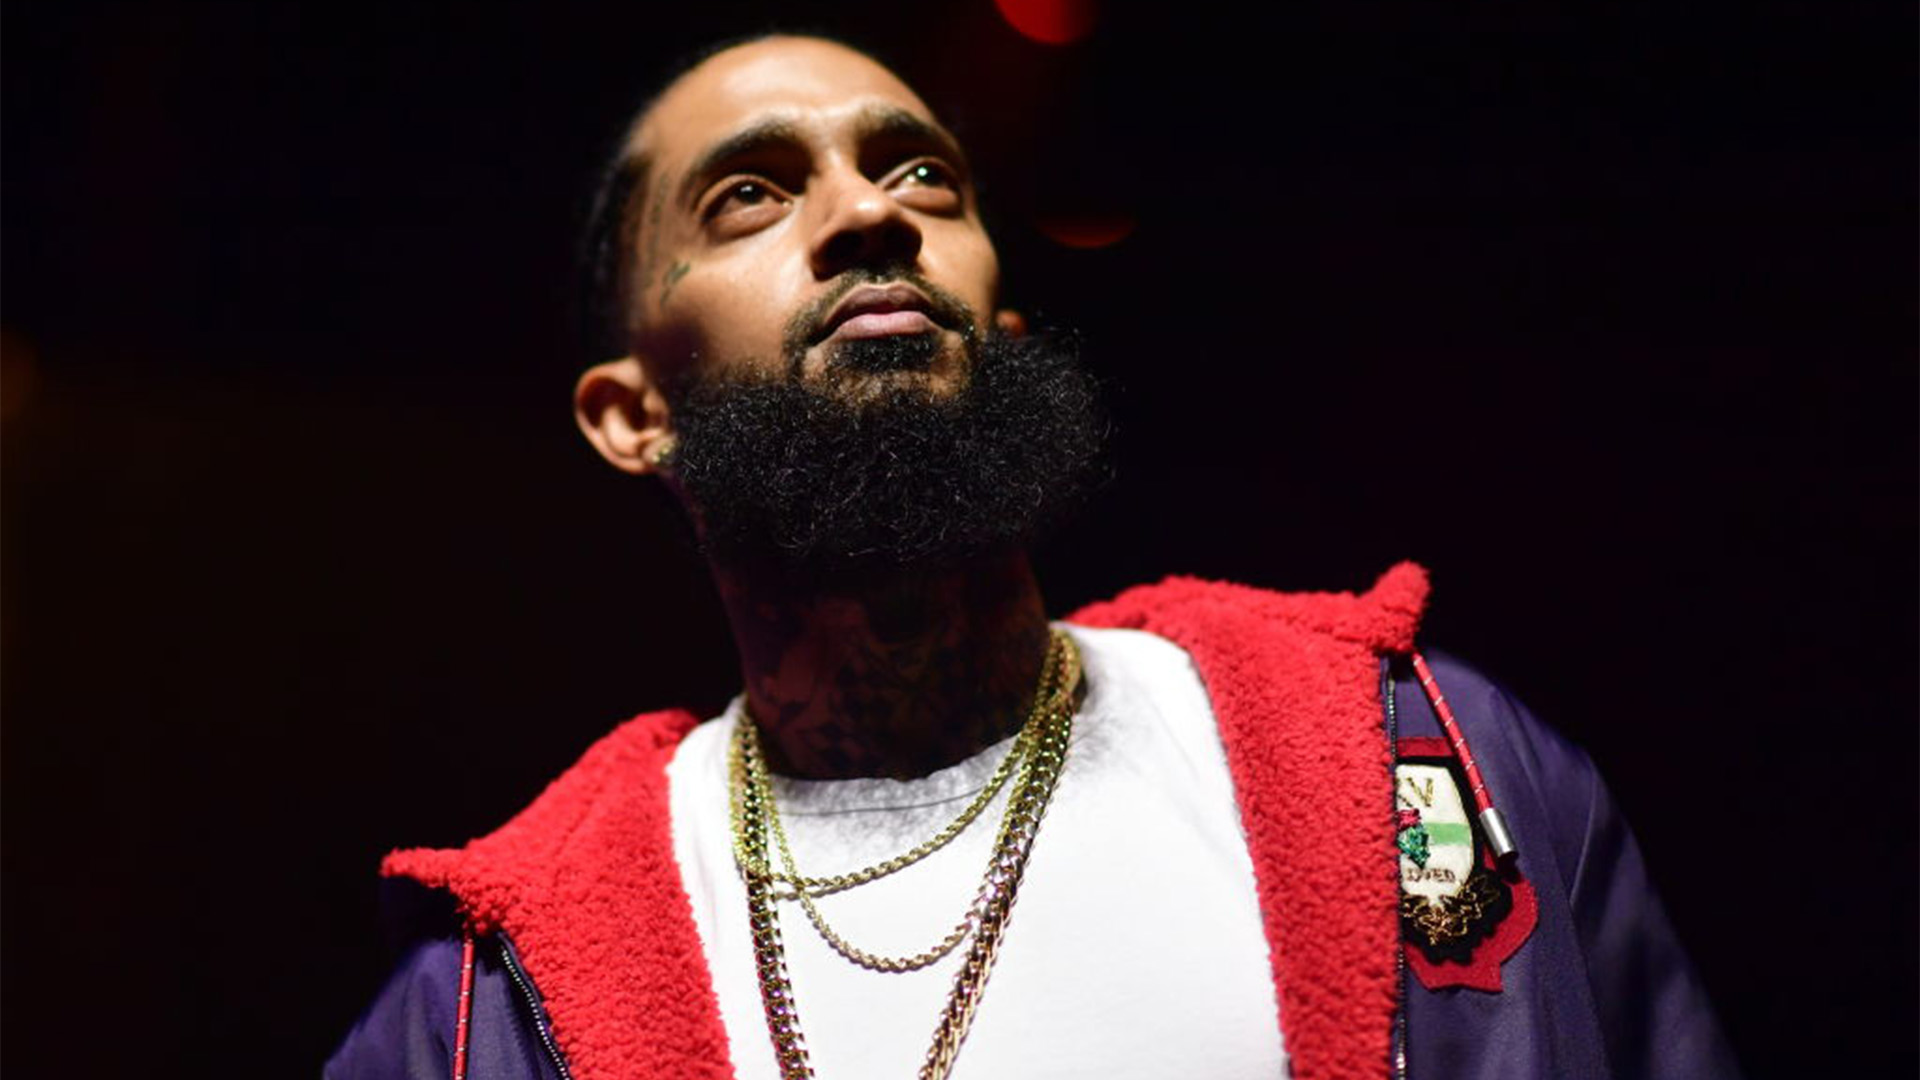 Nipsey Hussle Course To Be Offered At Loyola Marymount University, A School Where He Was An Adjunct Professor